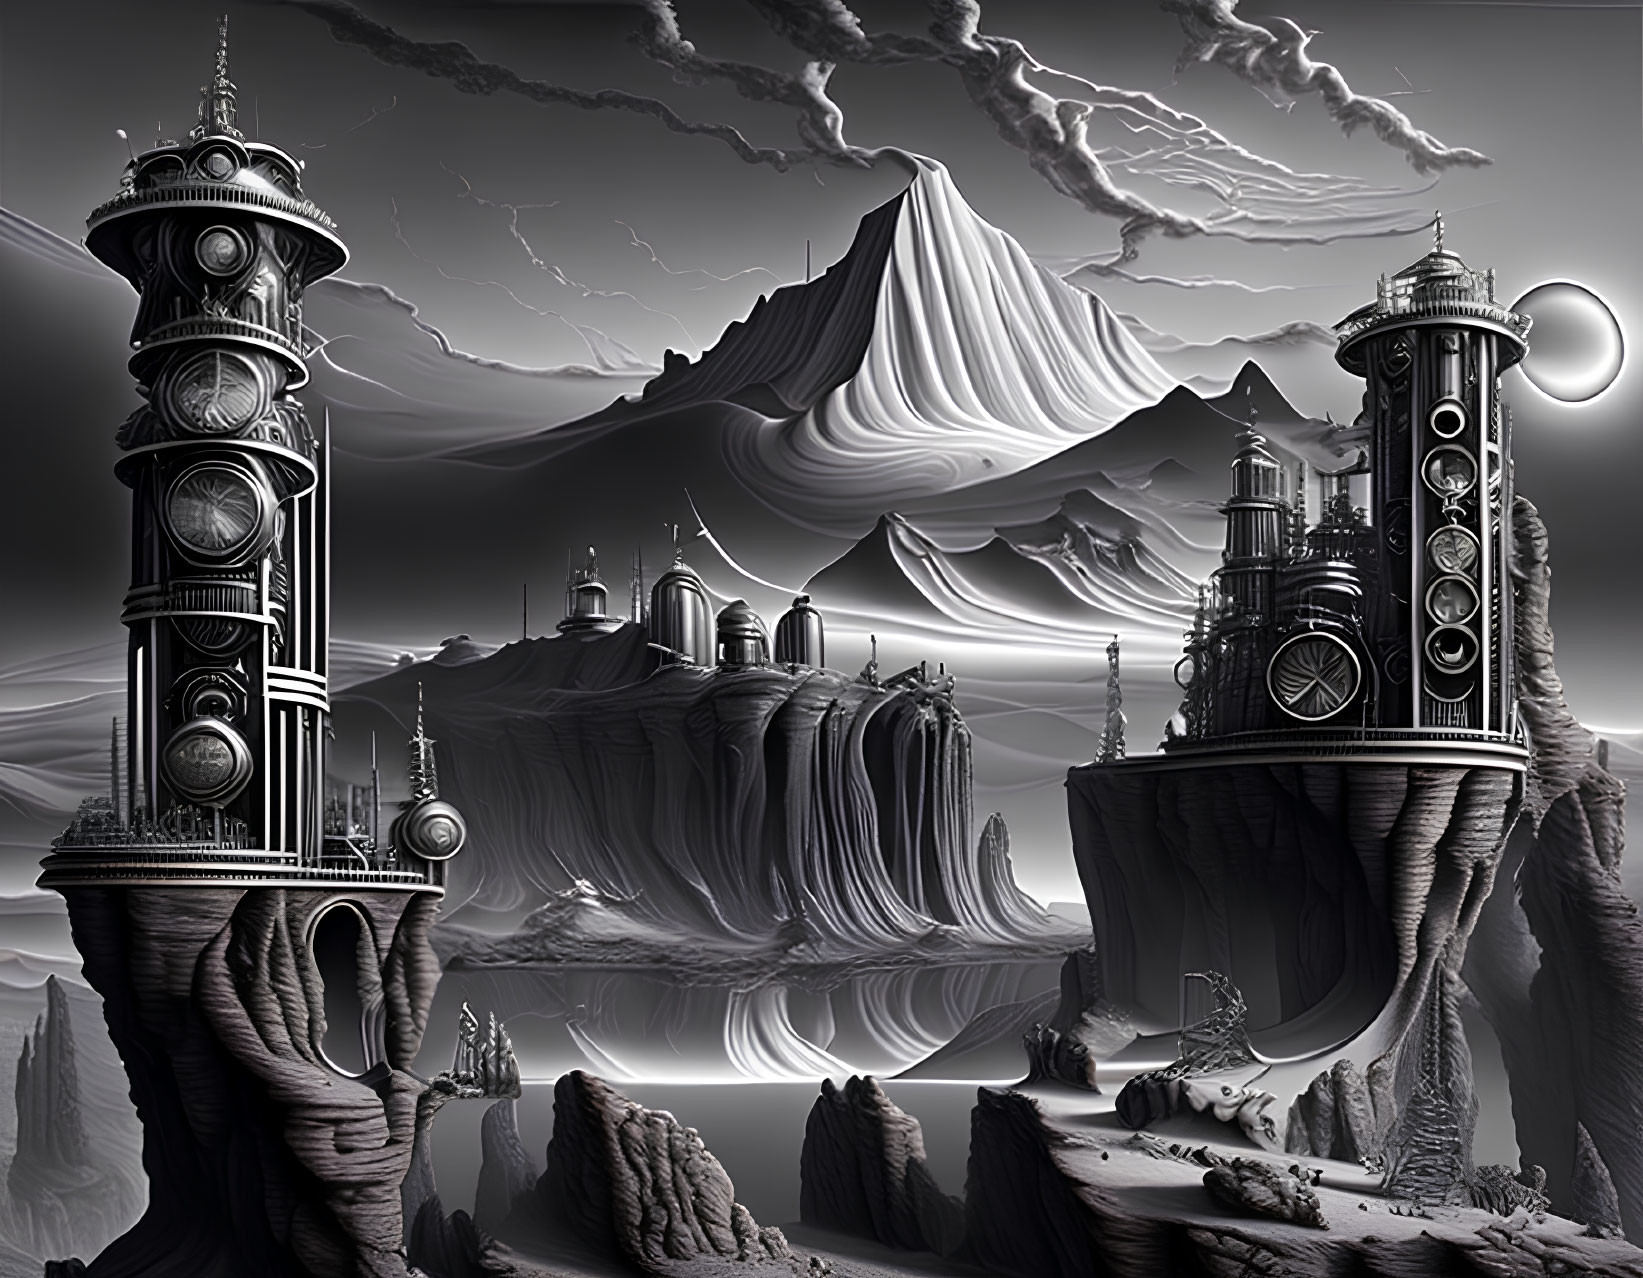 Monochromatic fantasy landscape with ornate towers on rock pillars